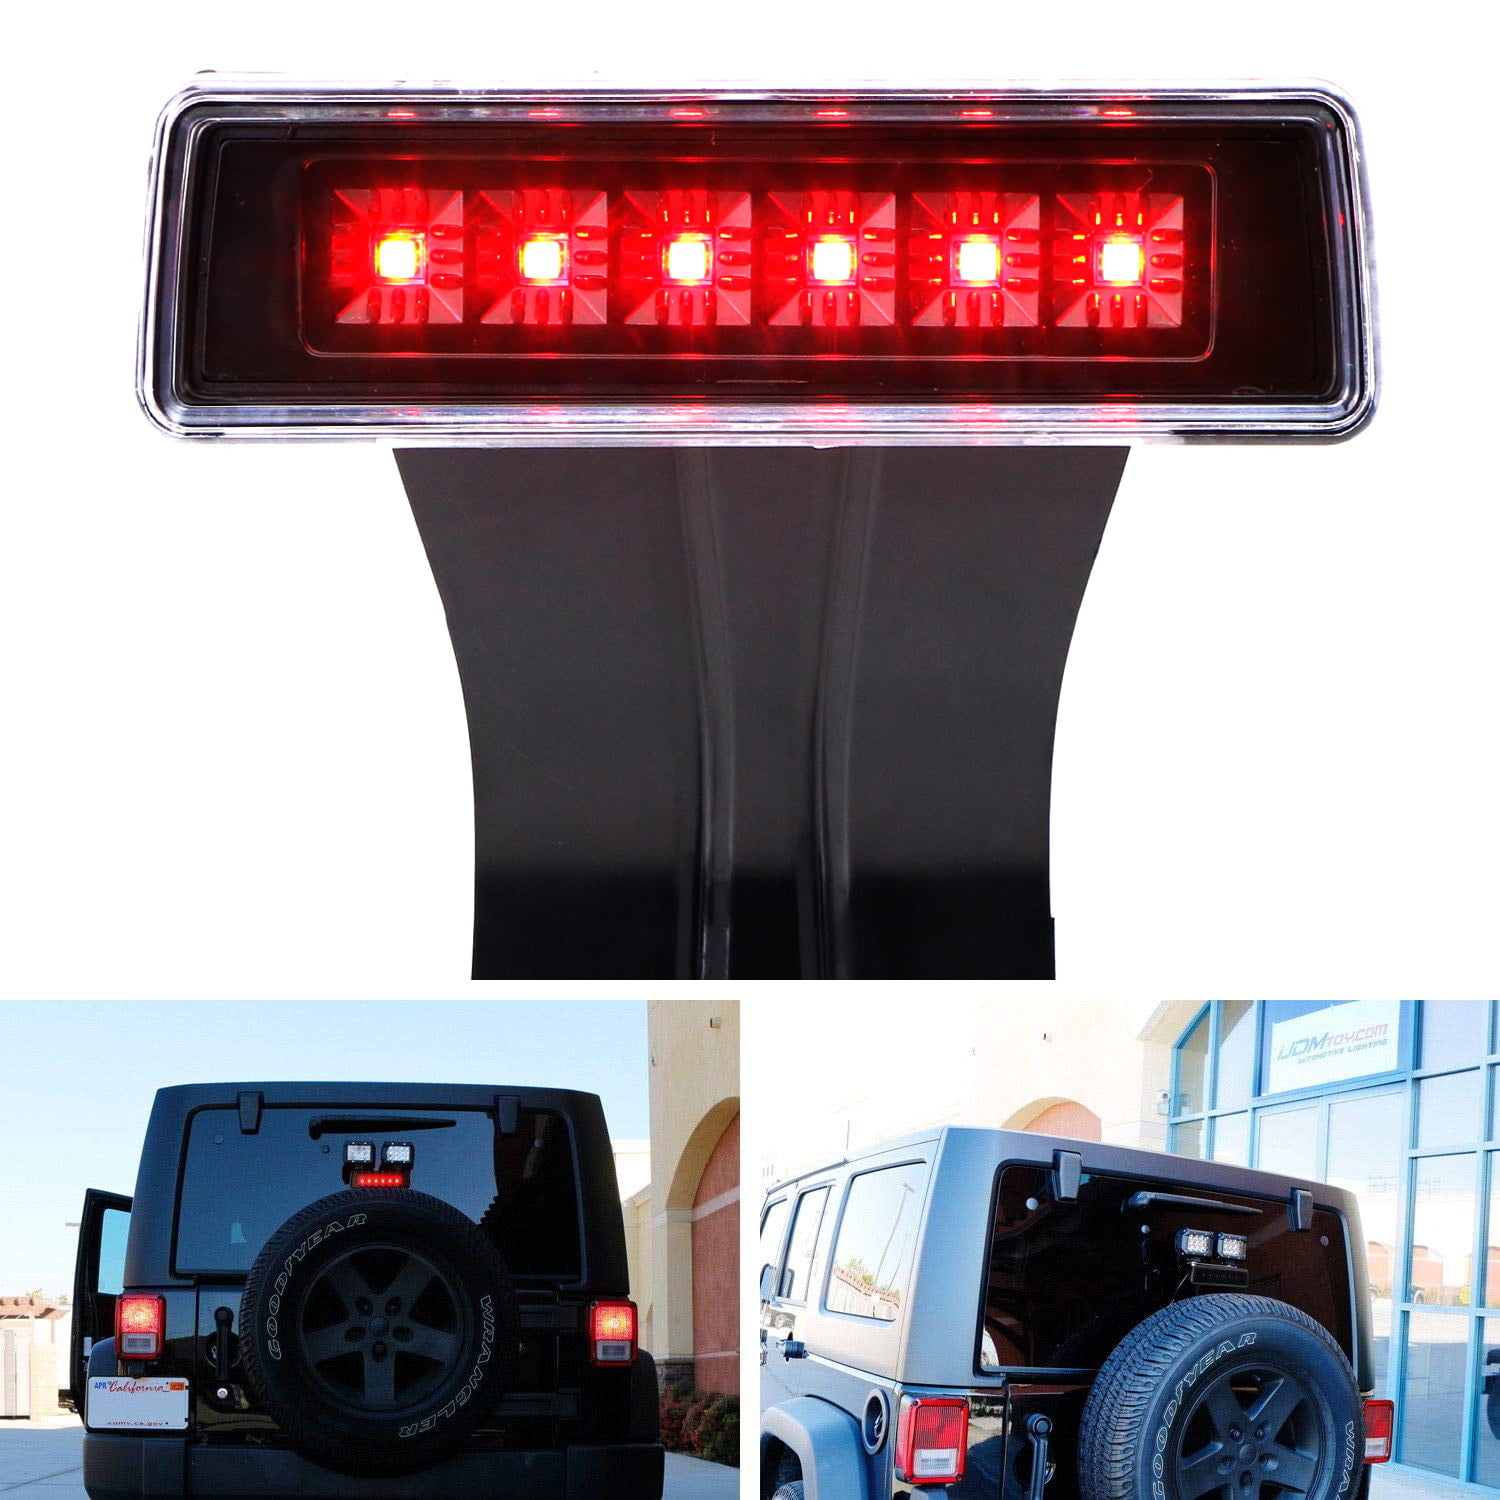 iJDMTOY Super Red LED 3rd Brake Light with F1 Strobe Feature Compatible  With Jeep 2007-2017 Wrangler JK, Black Housing High Mount Third Brakelamp  Assembly Powered by 8 Red LED Emitters 